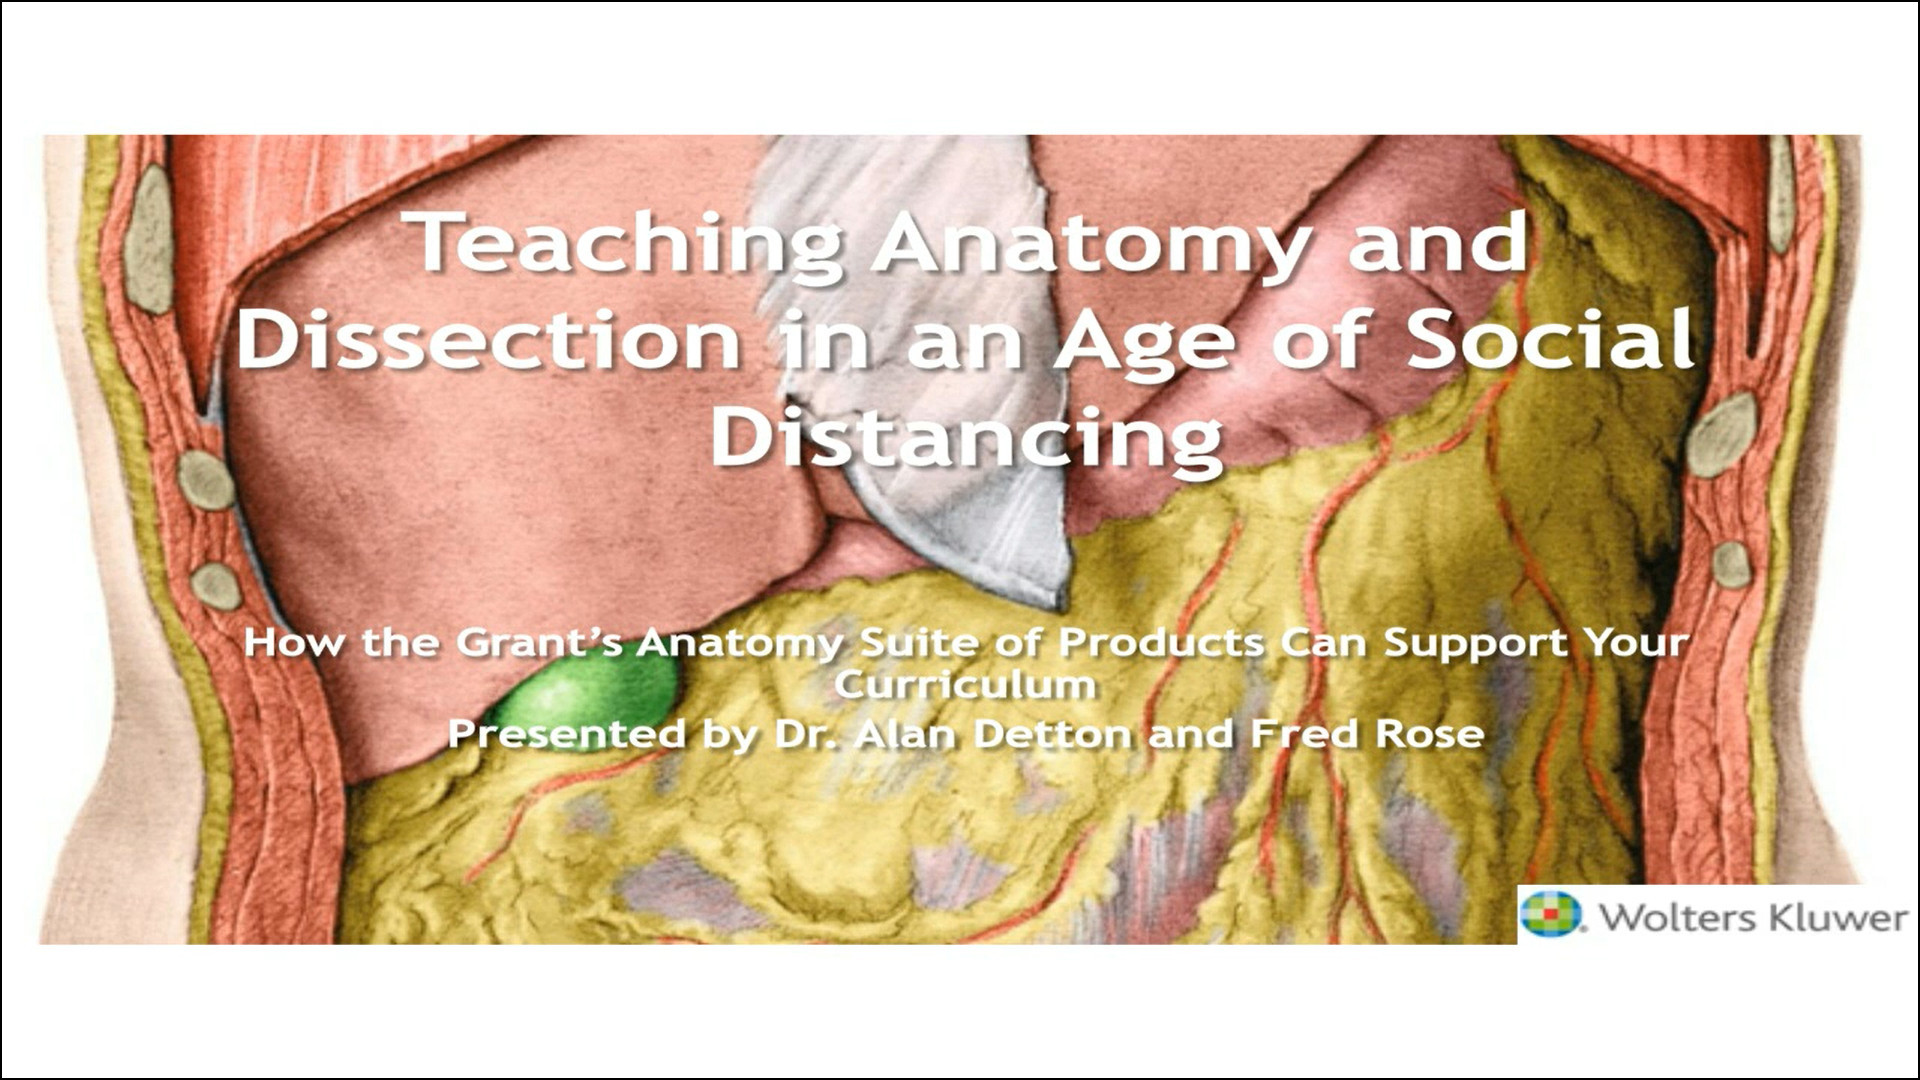 Screenshot of Teaching Anatomy and Dissection in an Age of Social Distancing video